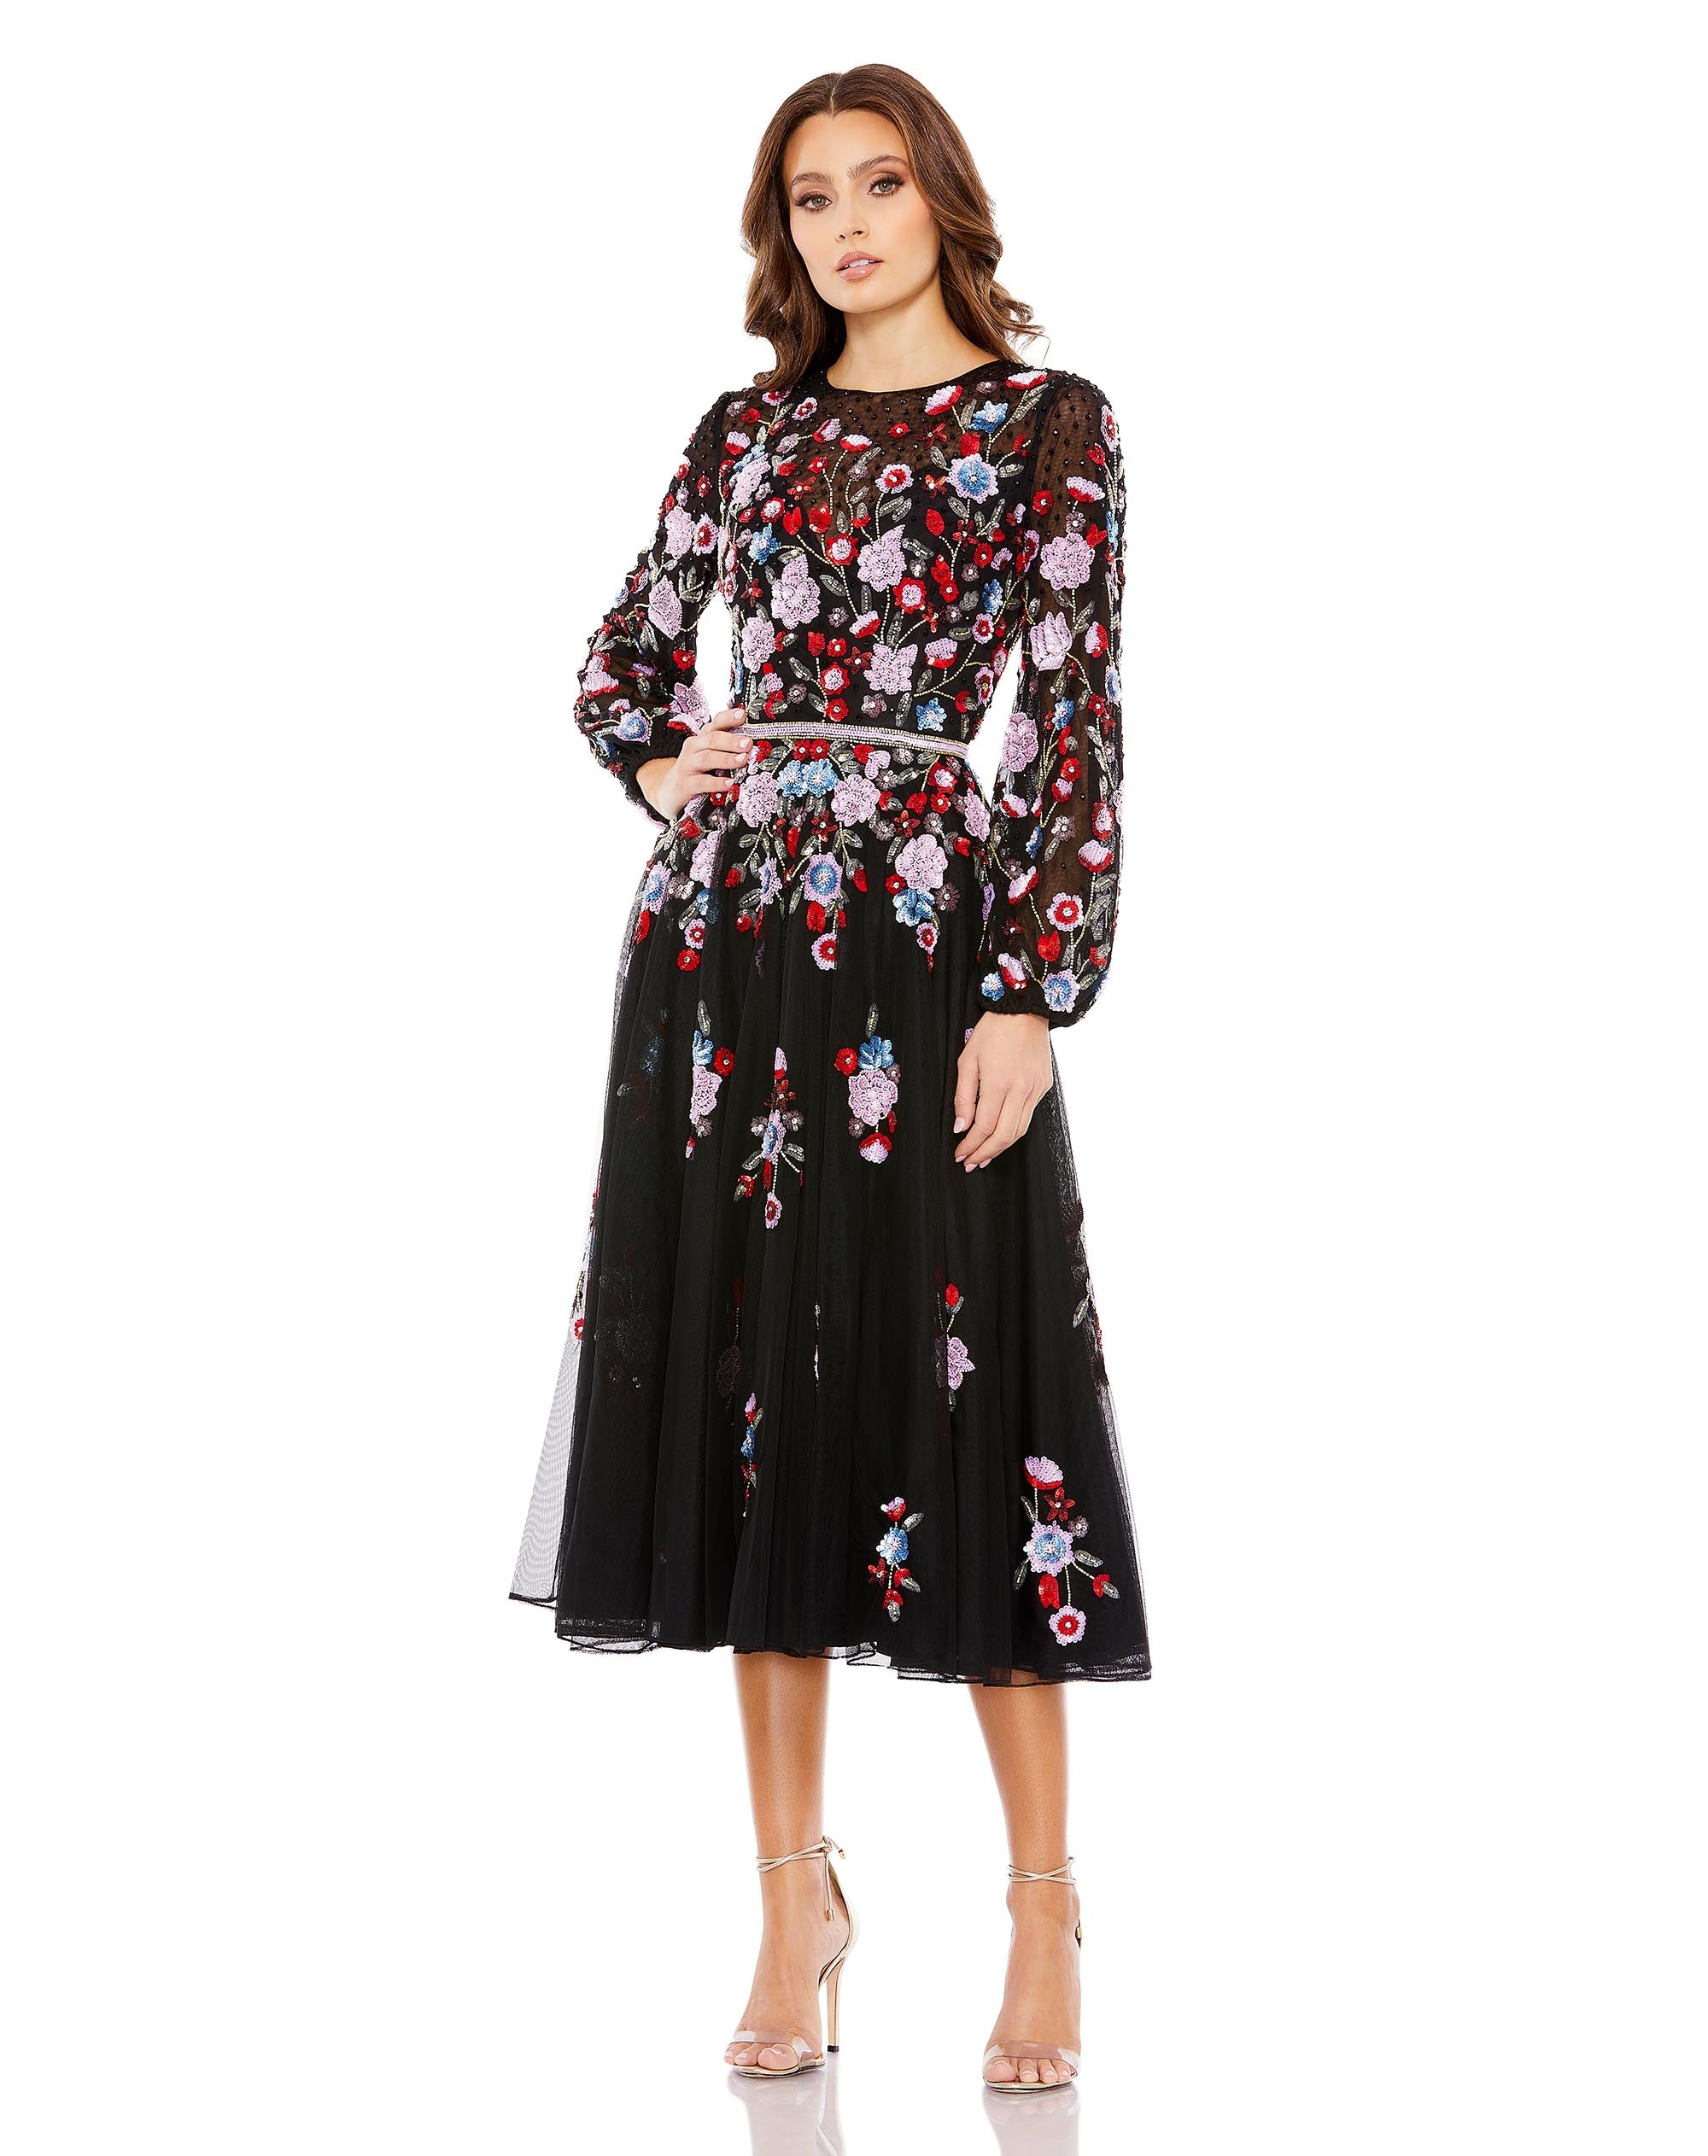 Sequined Floral High Neck Puff Sleeve Cocktail Dress